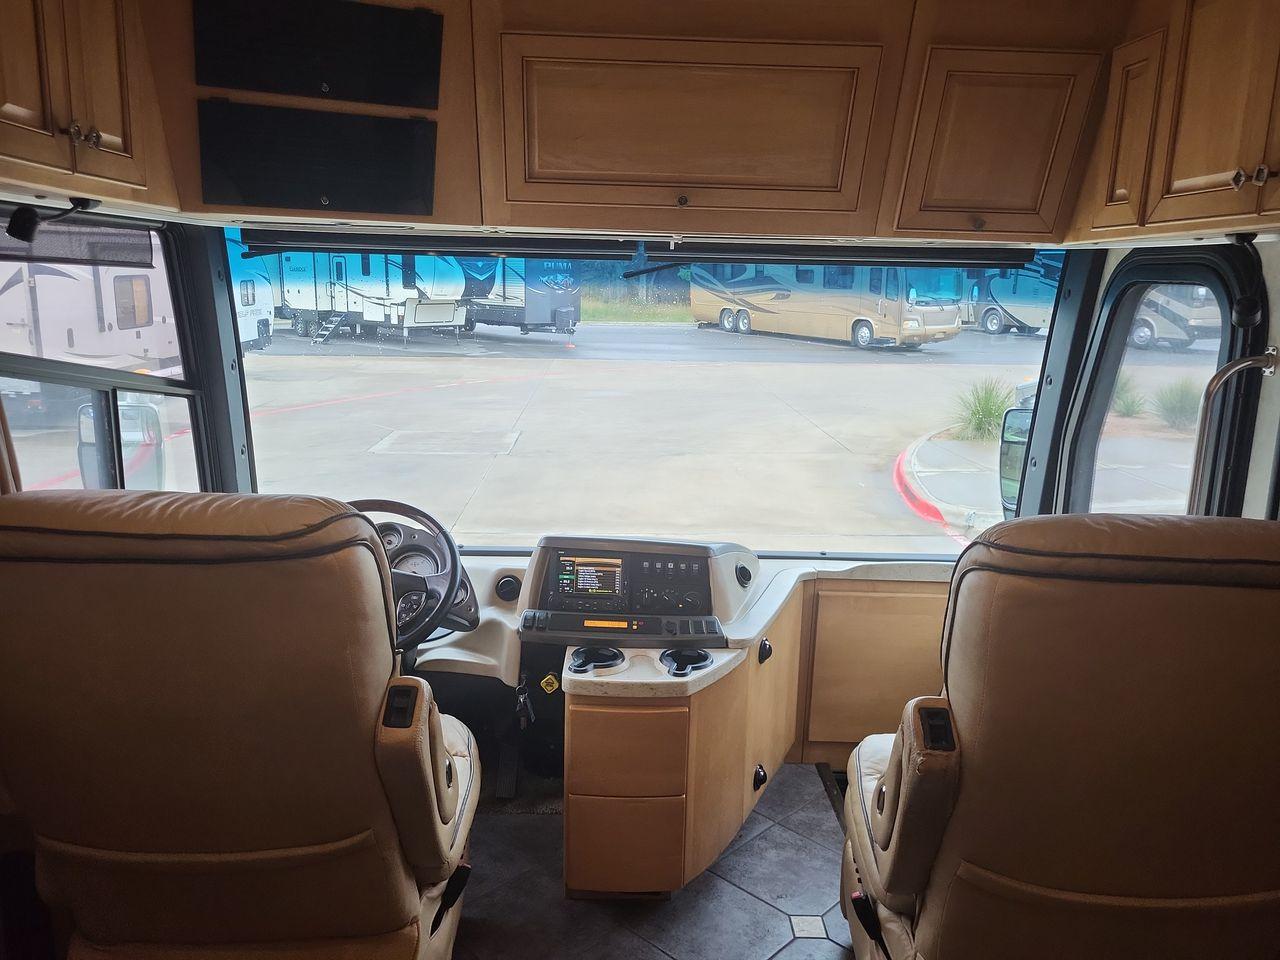 2009 WHITE FLEETWOOD AMERICAM ALLEGIANCE 40X (4VZBR1D9X9C) , Length: 40.96 ft. | Gross Weight: 34,600 lbs. | Slides: 3 transmission, located at 4319 N Main St, Cleburne, TX, 76033, (817) 678-5133, 32.385960, -97.391212 - Photo #10